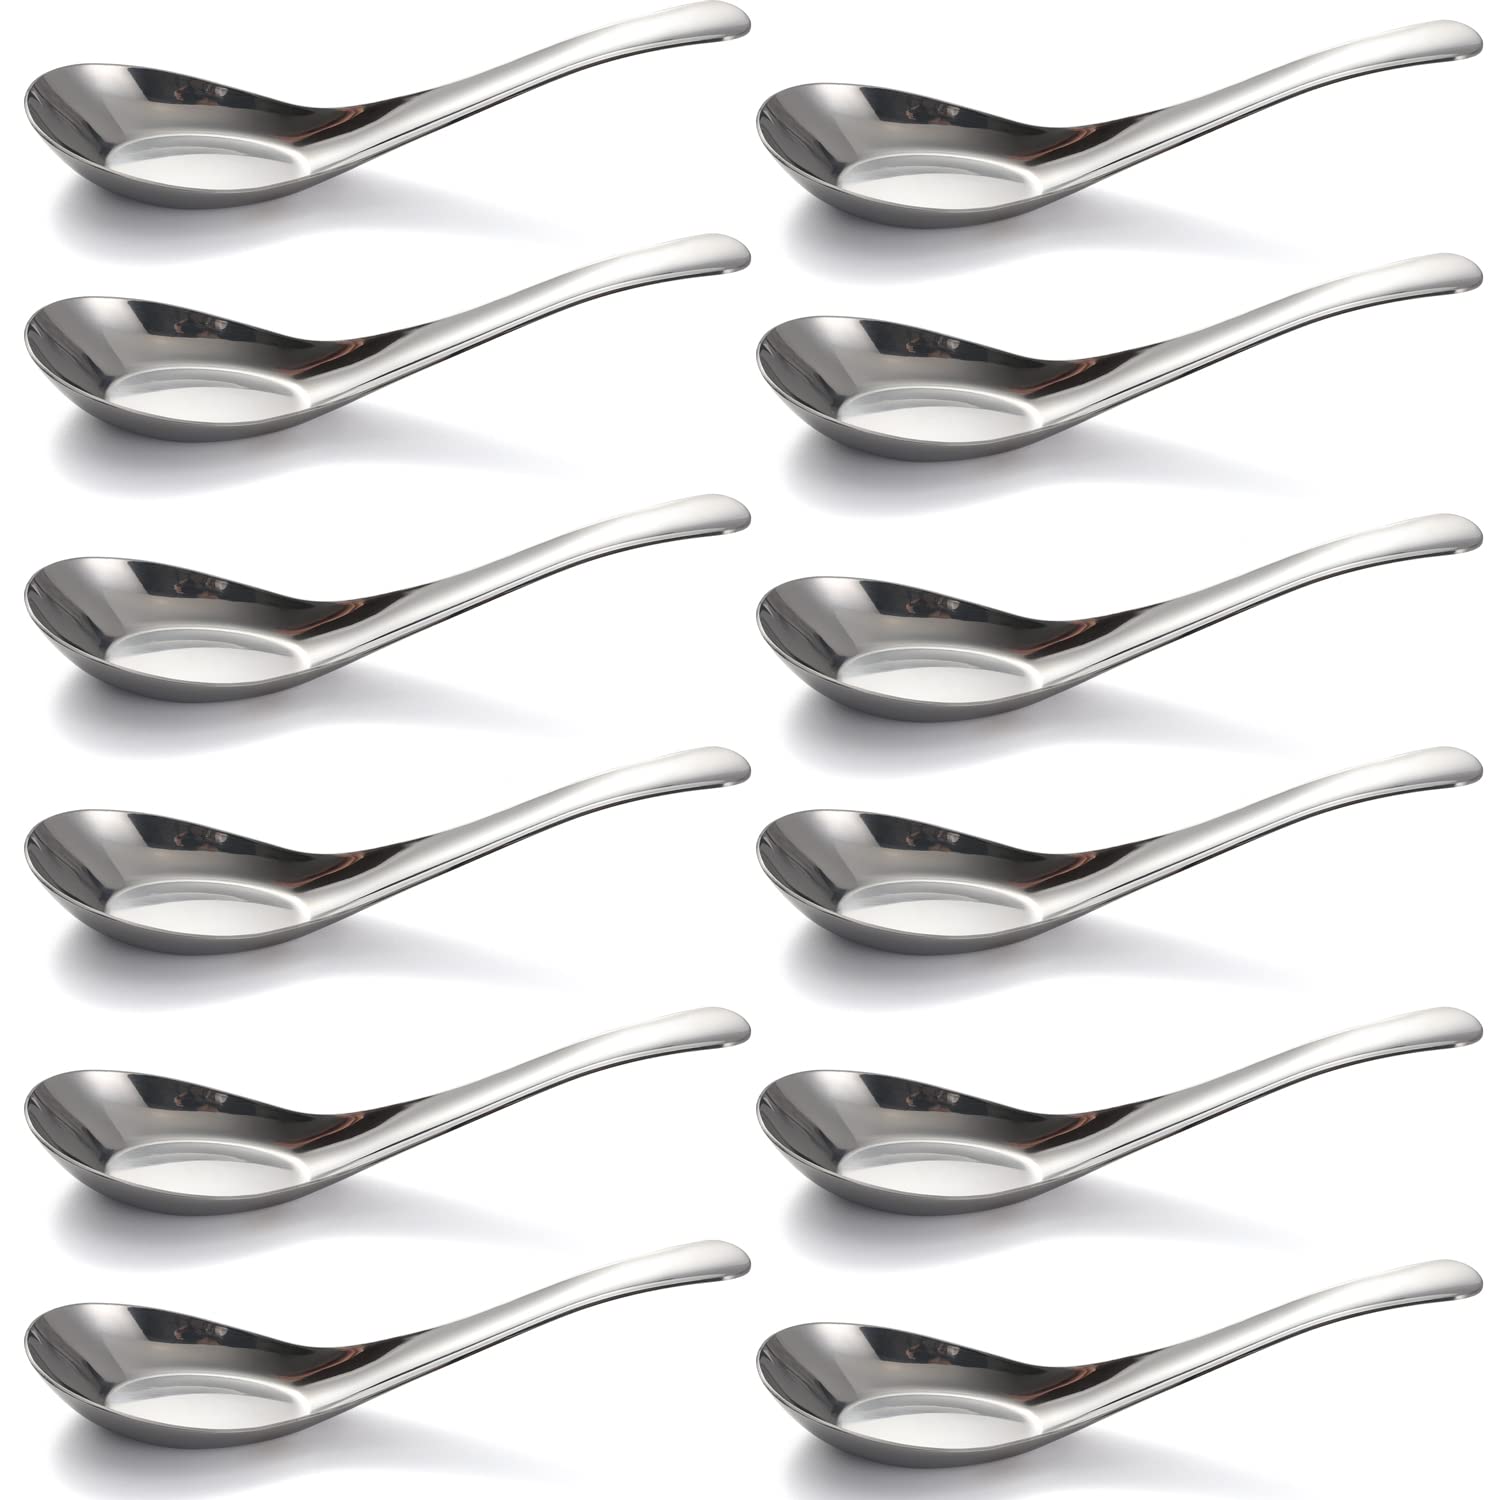 Stainless Steel Soup Spoons Dinner Spoons Set of 12 Chinese Soup Spoon Silver Bouillon Spoon Mirror Polished